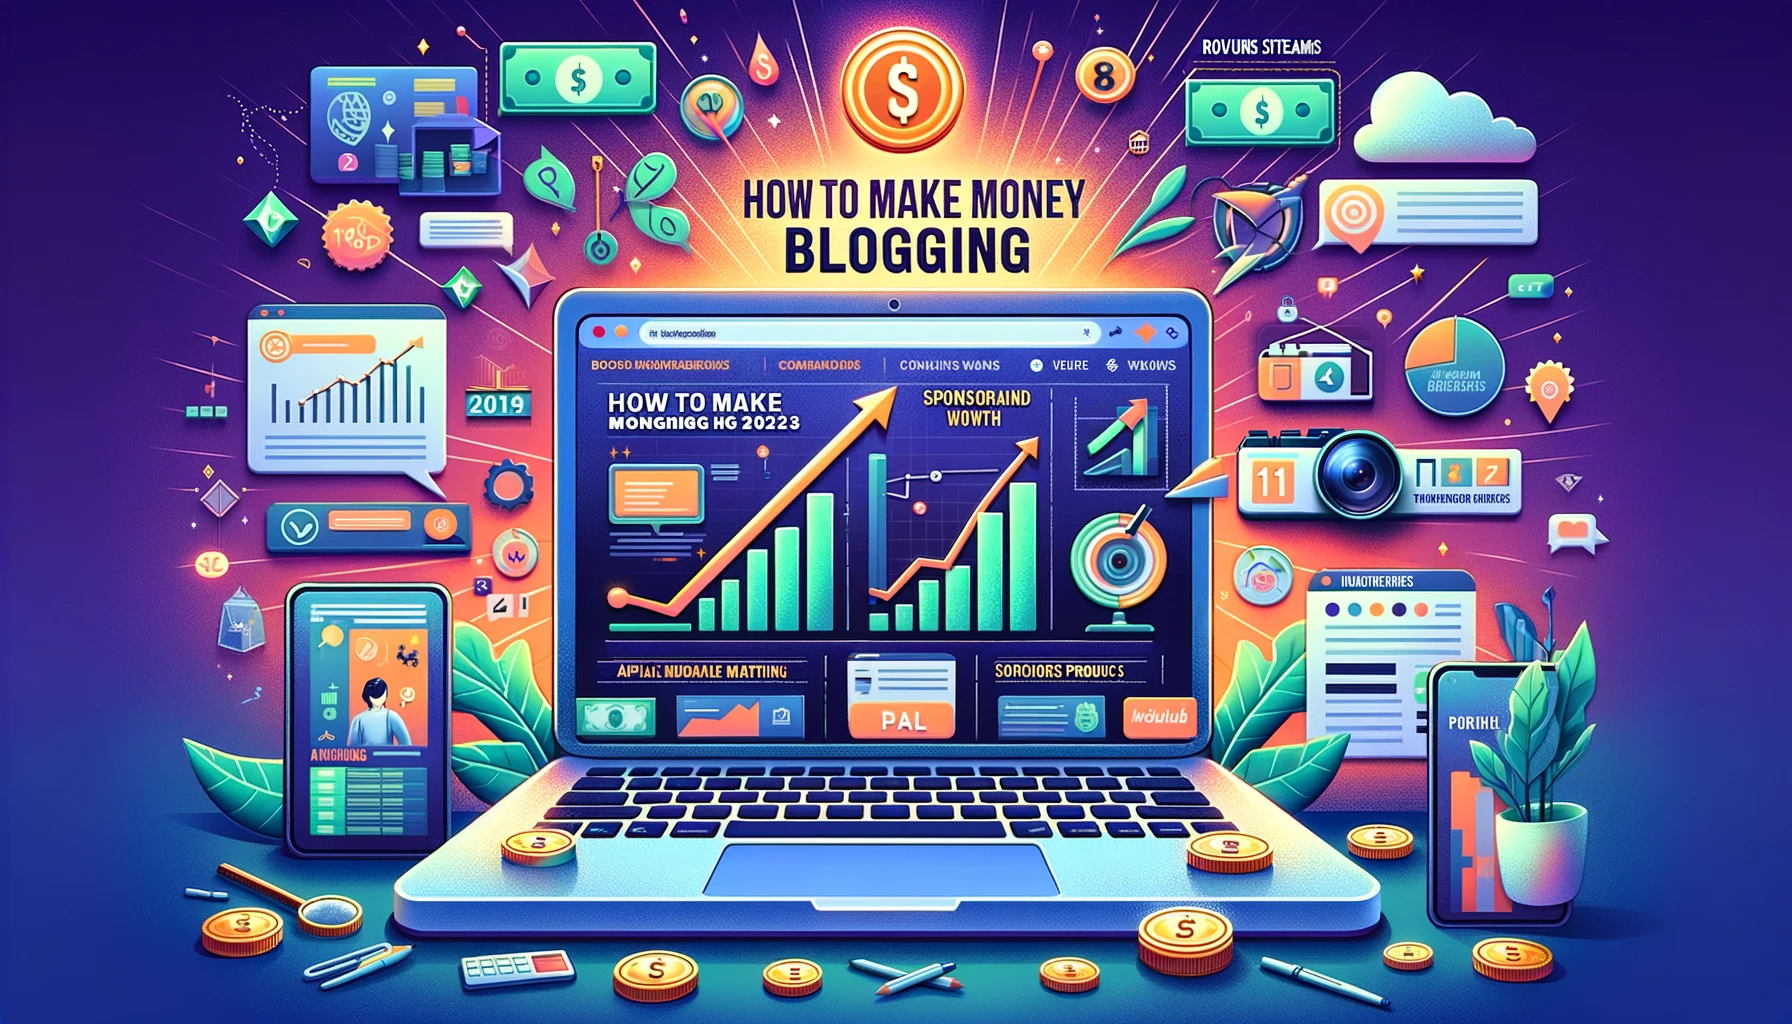 How to Make Money Blogging in 2023 11 Proven and Realistic Ways